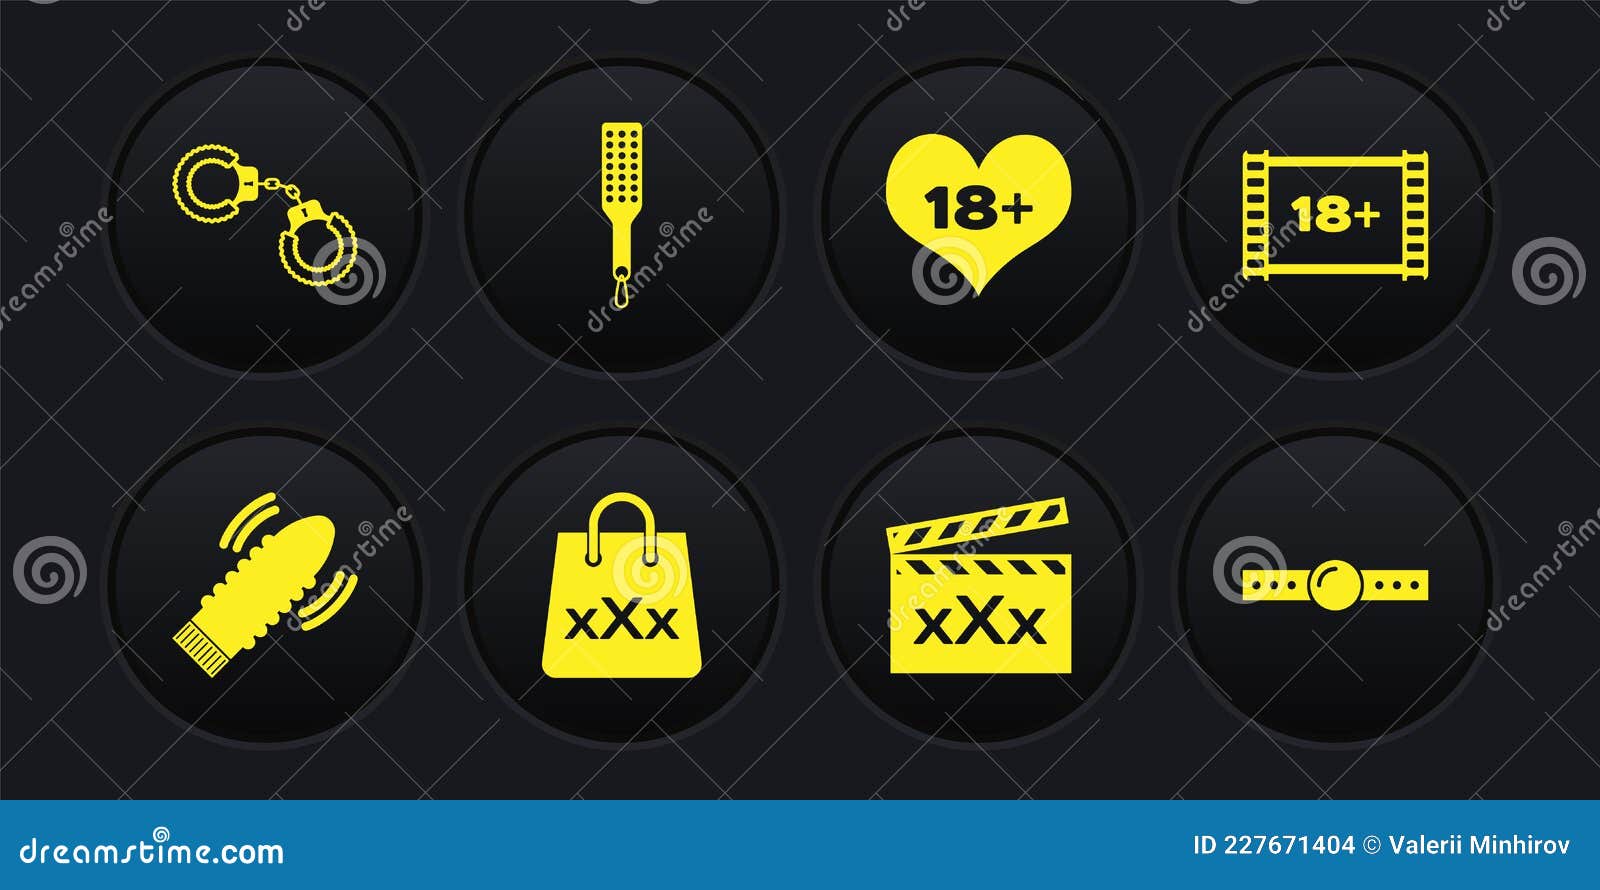 Xxx Plu Film Video - Set Vibrator for Sex Games, Play Video with 18 Plus, Shopping Bag Triple X,  Movie Clapper Sex, Content Heart Stock Vector - Illustration of paddle,  vector: 227671404